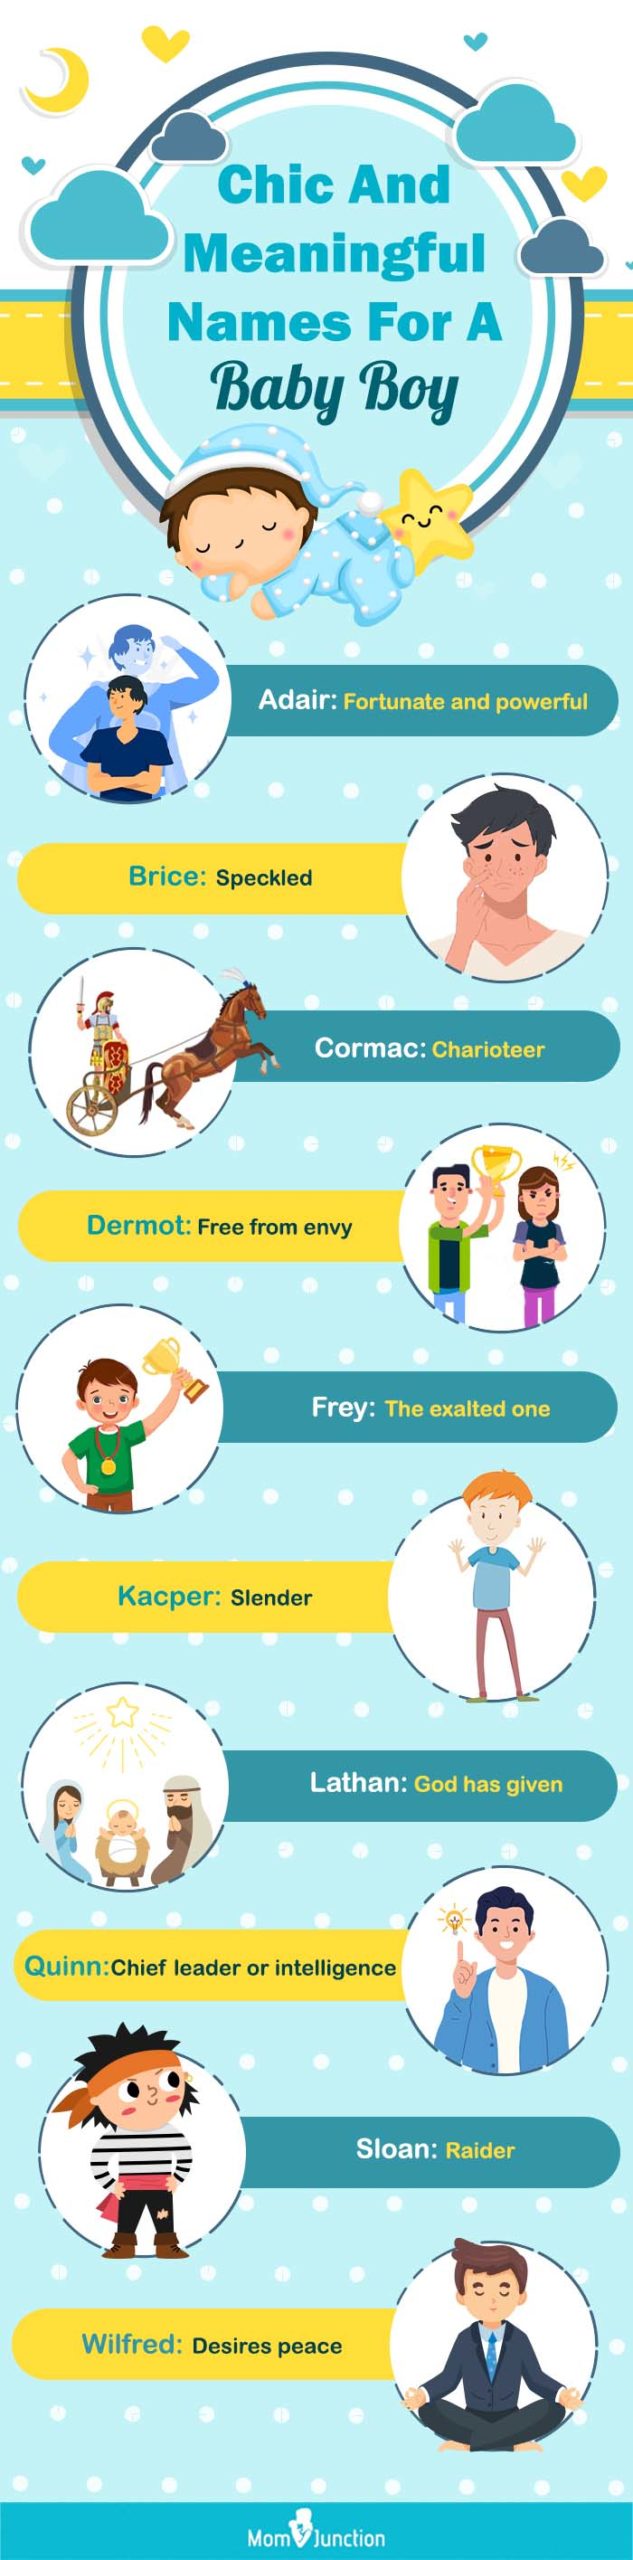 chic and meaningful names for a baby boy [infographic]